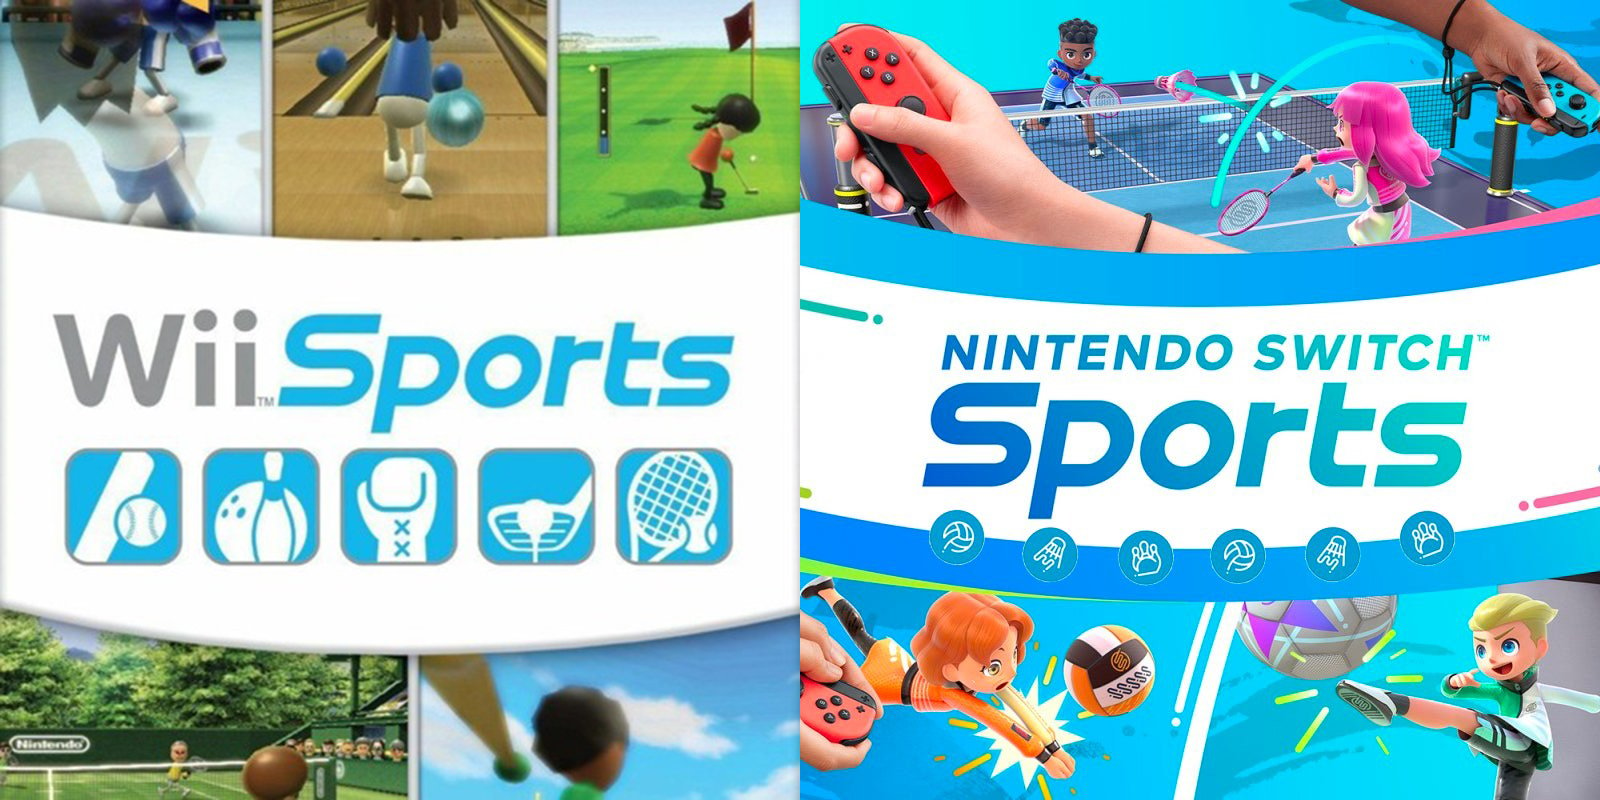 dolor de muelas maravilloso Infantil Wii Sports vs Nintendo Switch Sports: What's the Difference